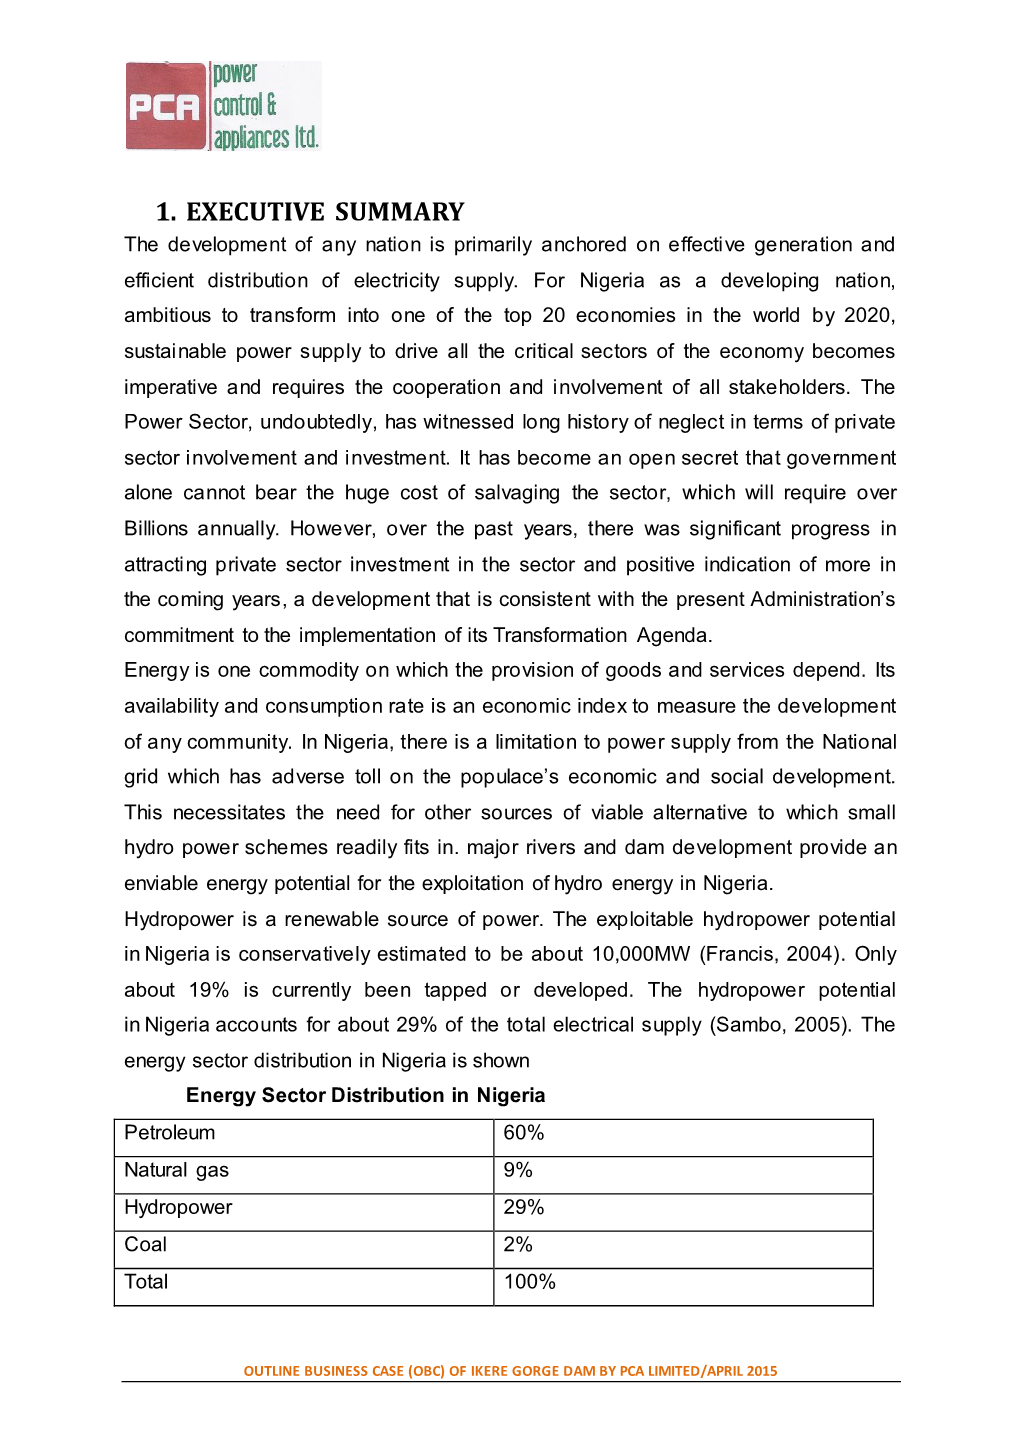 1. EXECUTIVE SUMMARY the Development of Any Nation Is Primarily Anchored on Effective Generation and Efficient Distribution of Electricity Supply